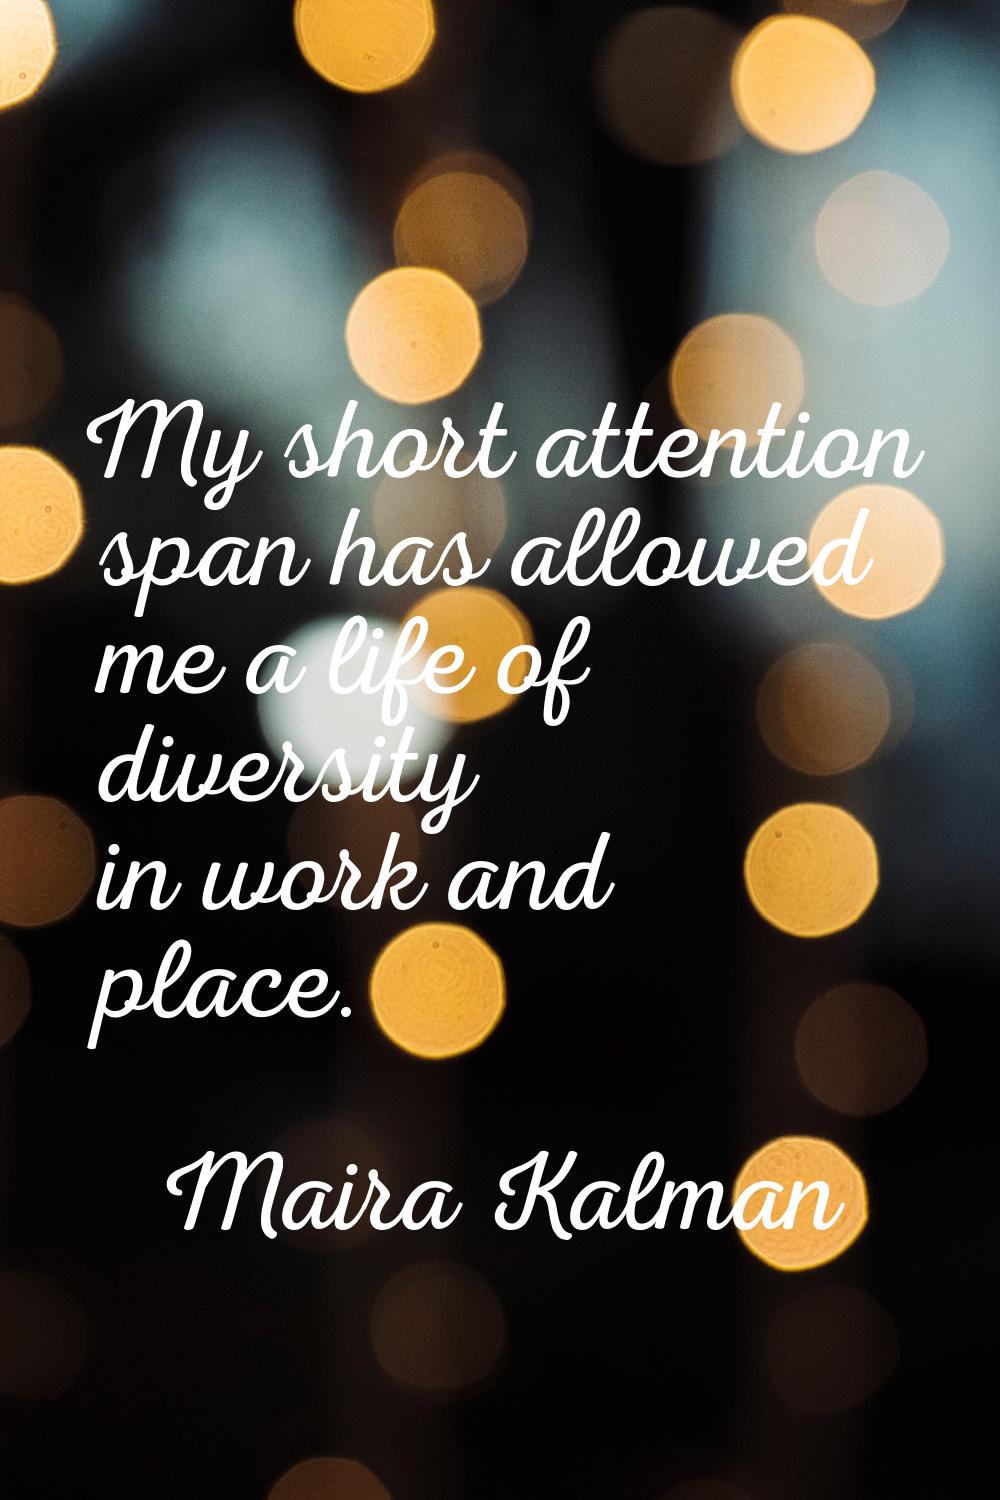 My short attention span has allowed me a life of diversity in work and place.